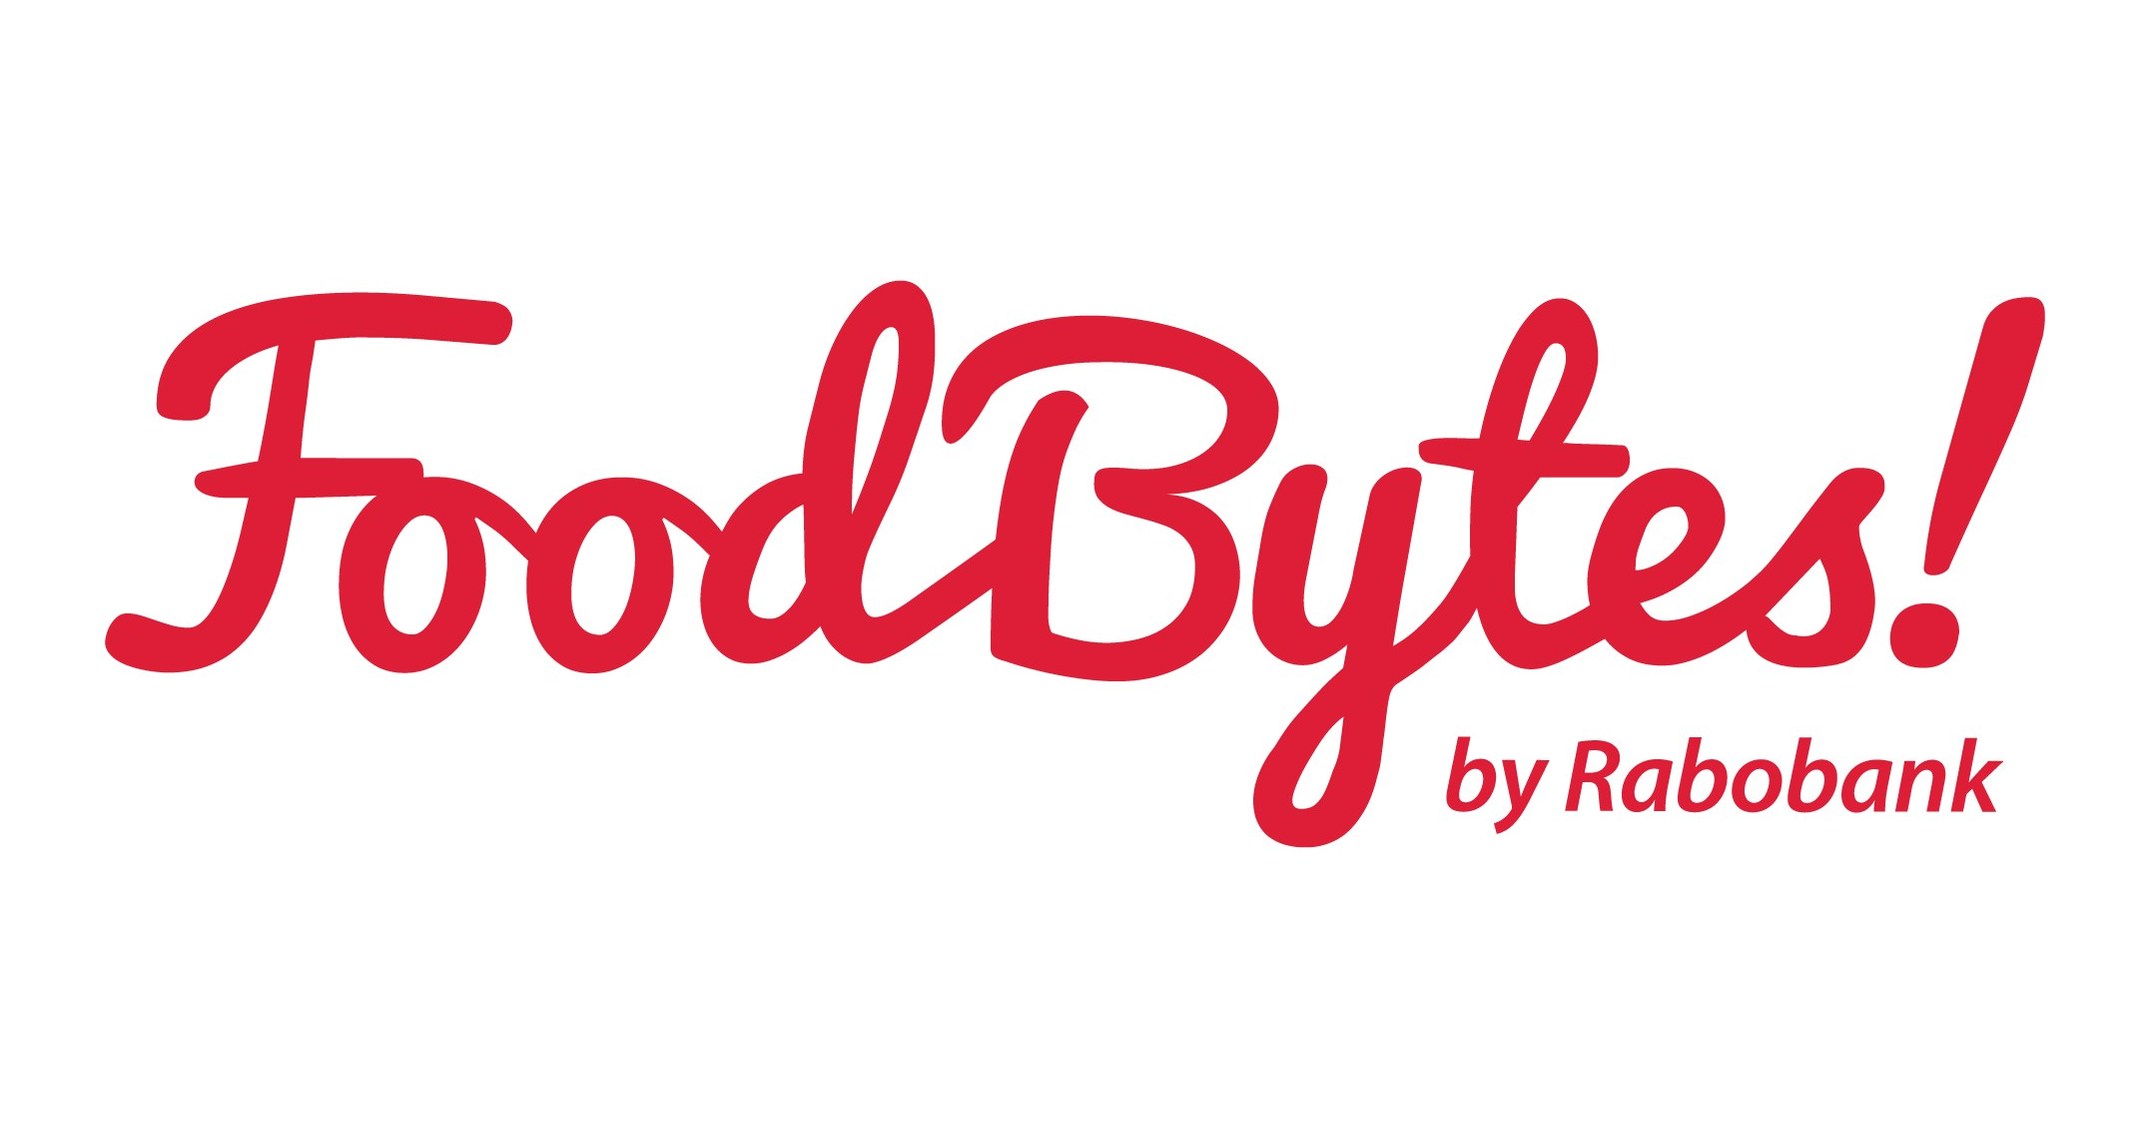 Hypercell Technologies Selected as Standout Startup for FoodBytes! Program 5 Hypercell Technologies Selected as Standout Startup for FoodBytes! Program